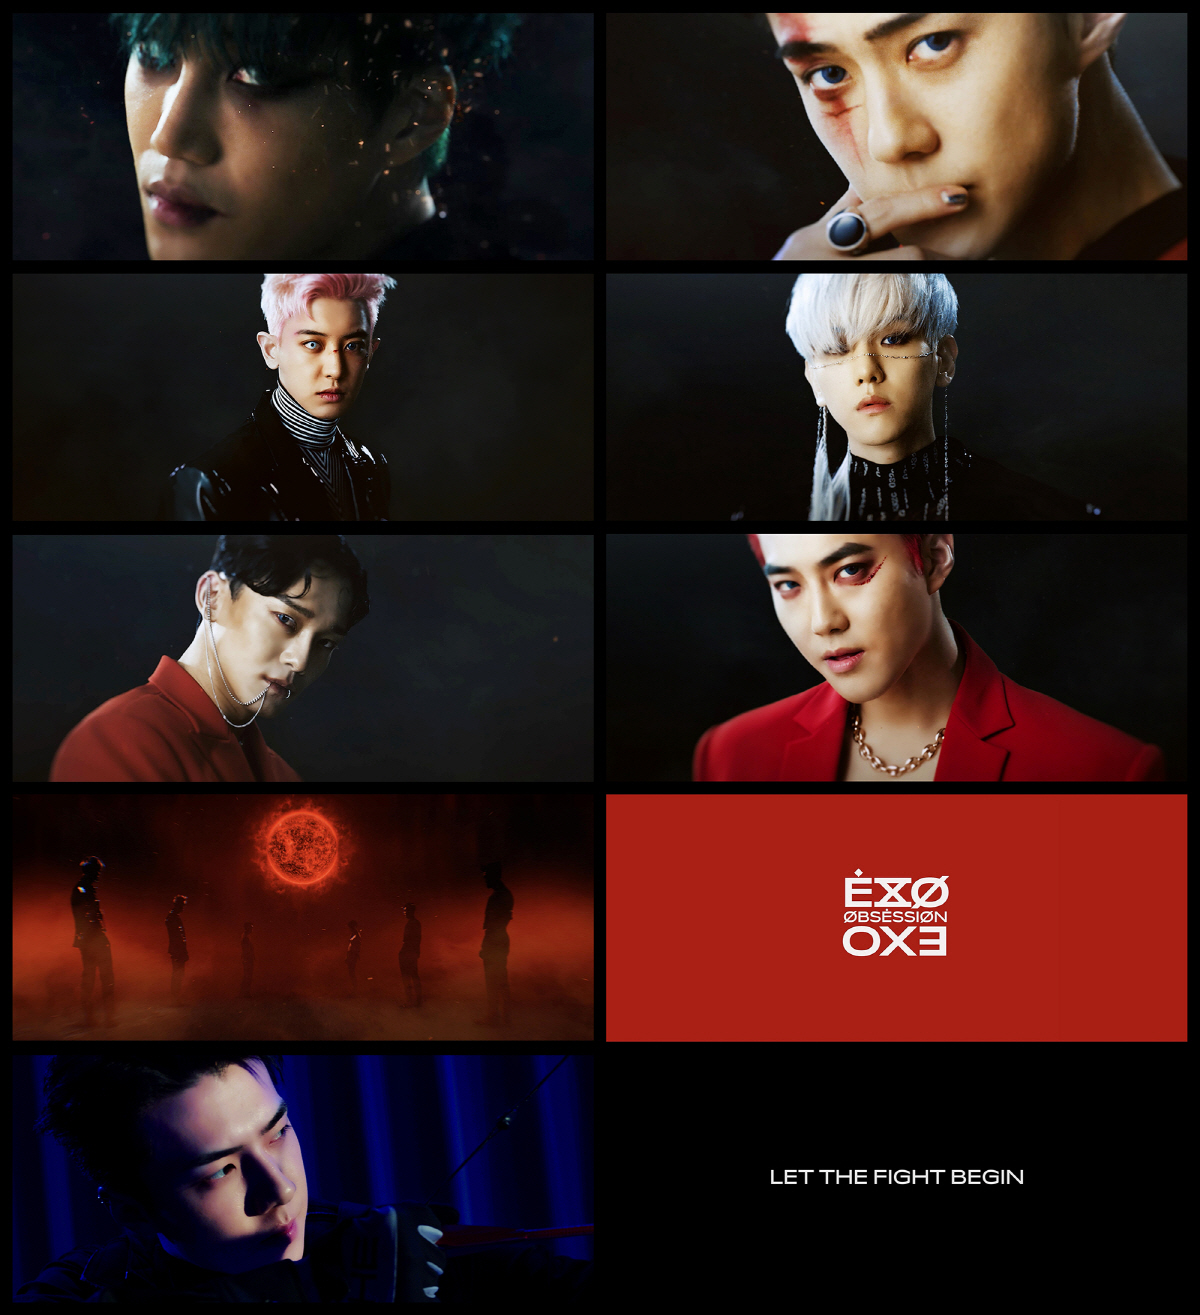 EXO (a member of SM Entertainment), which will release its regular 6th album OBSESSION (Option) on November 27, has entered comeback county with a breakthrough promotion.The trailer video to announce the start of the #EXODEUX (#EXODUX) promotion was released through the official EXO website and various SNS accounts at 0:00 today (8th), and the #EXODEUX promotion is expected to raise expectations for the new album with a different teaser promotion that combines the concept of the regular 6th album and EXOs world view storytelling that has been in its debut.The trailer video released today is getting a hot response by foreshadowing the emergence of another EXO, the so-called X-EXO, created by the red energy, the subject of the conflict, and the Battle of EXO vs. X-EXO, which will be unfolded in the future.In addition, various SNS accounts of X-EXO will be opened, and various contents such as teaser images, videos, and music video teasers produced with contradictory concepts will be released sequentially through EXO and X-EXO accounts, which will focus attention on global fans.Also, at 12 oclock tonight, we will open # EXODEUX mobile promotion page, show the Battle situation of EXO and X-EXO in real time based on the users response index such as like number, retweet and comment number of contents released to both accounts, and show reward contents about concept won by Battle in the future. It is expected to be the EUX promotion.On the other hand, EXOs regular 6th album OBSESSION will be released on November 27th and can be purchased at various on-line and off-line music stores.